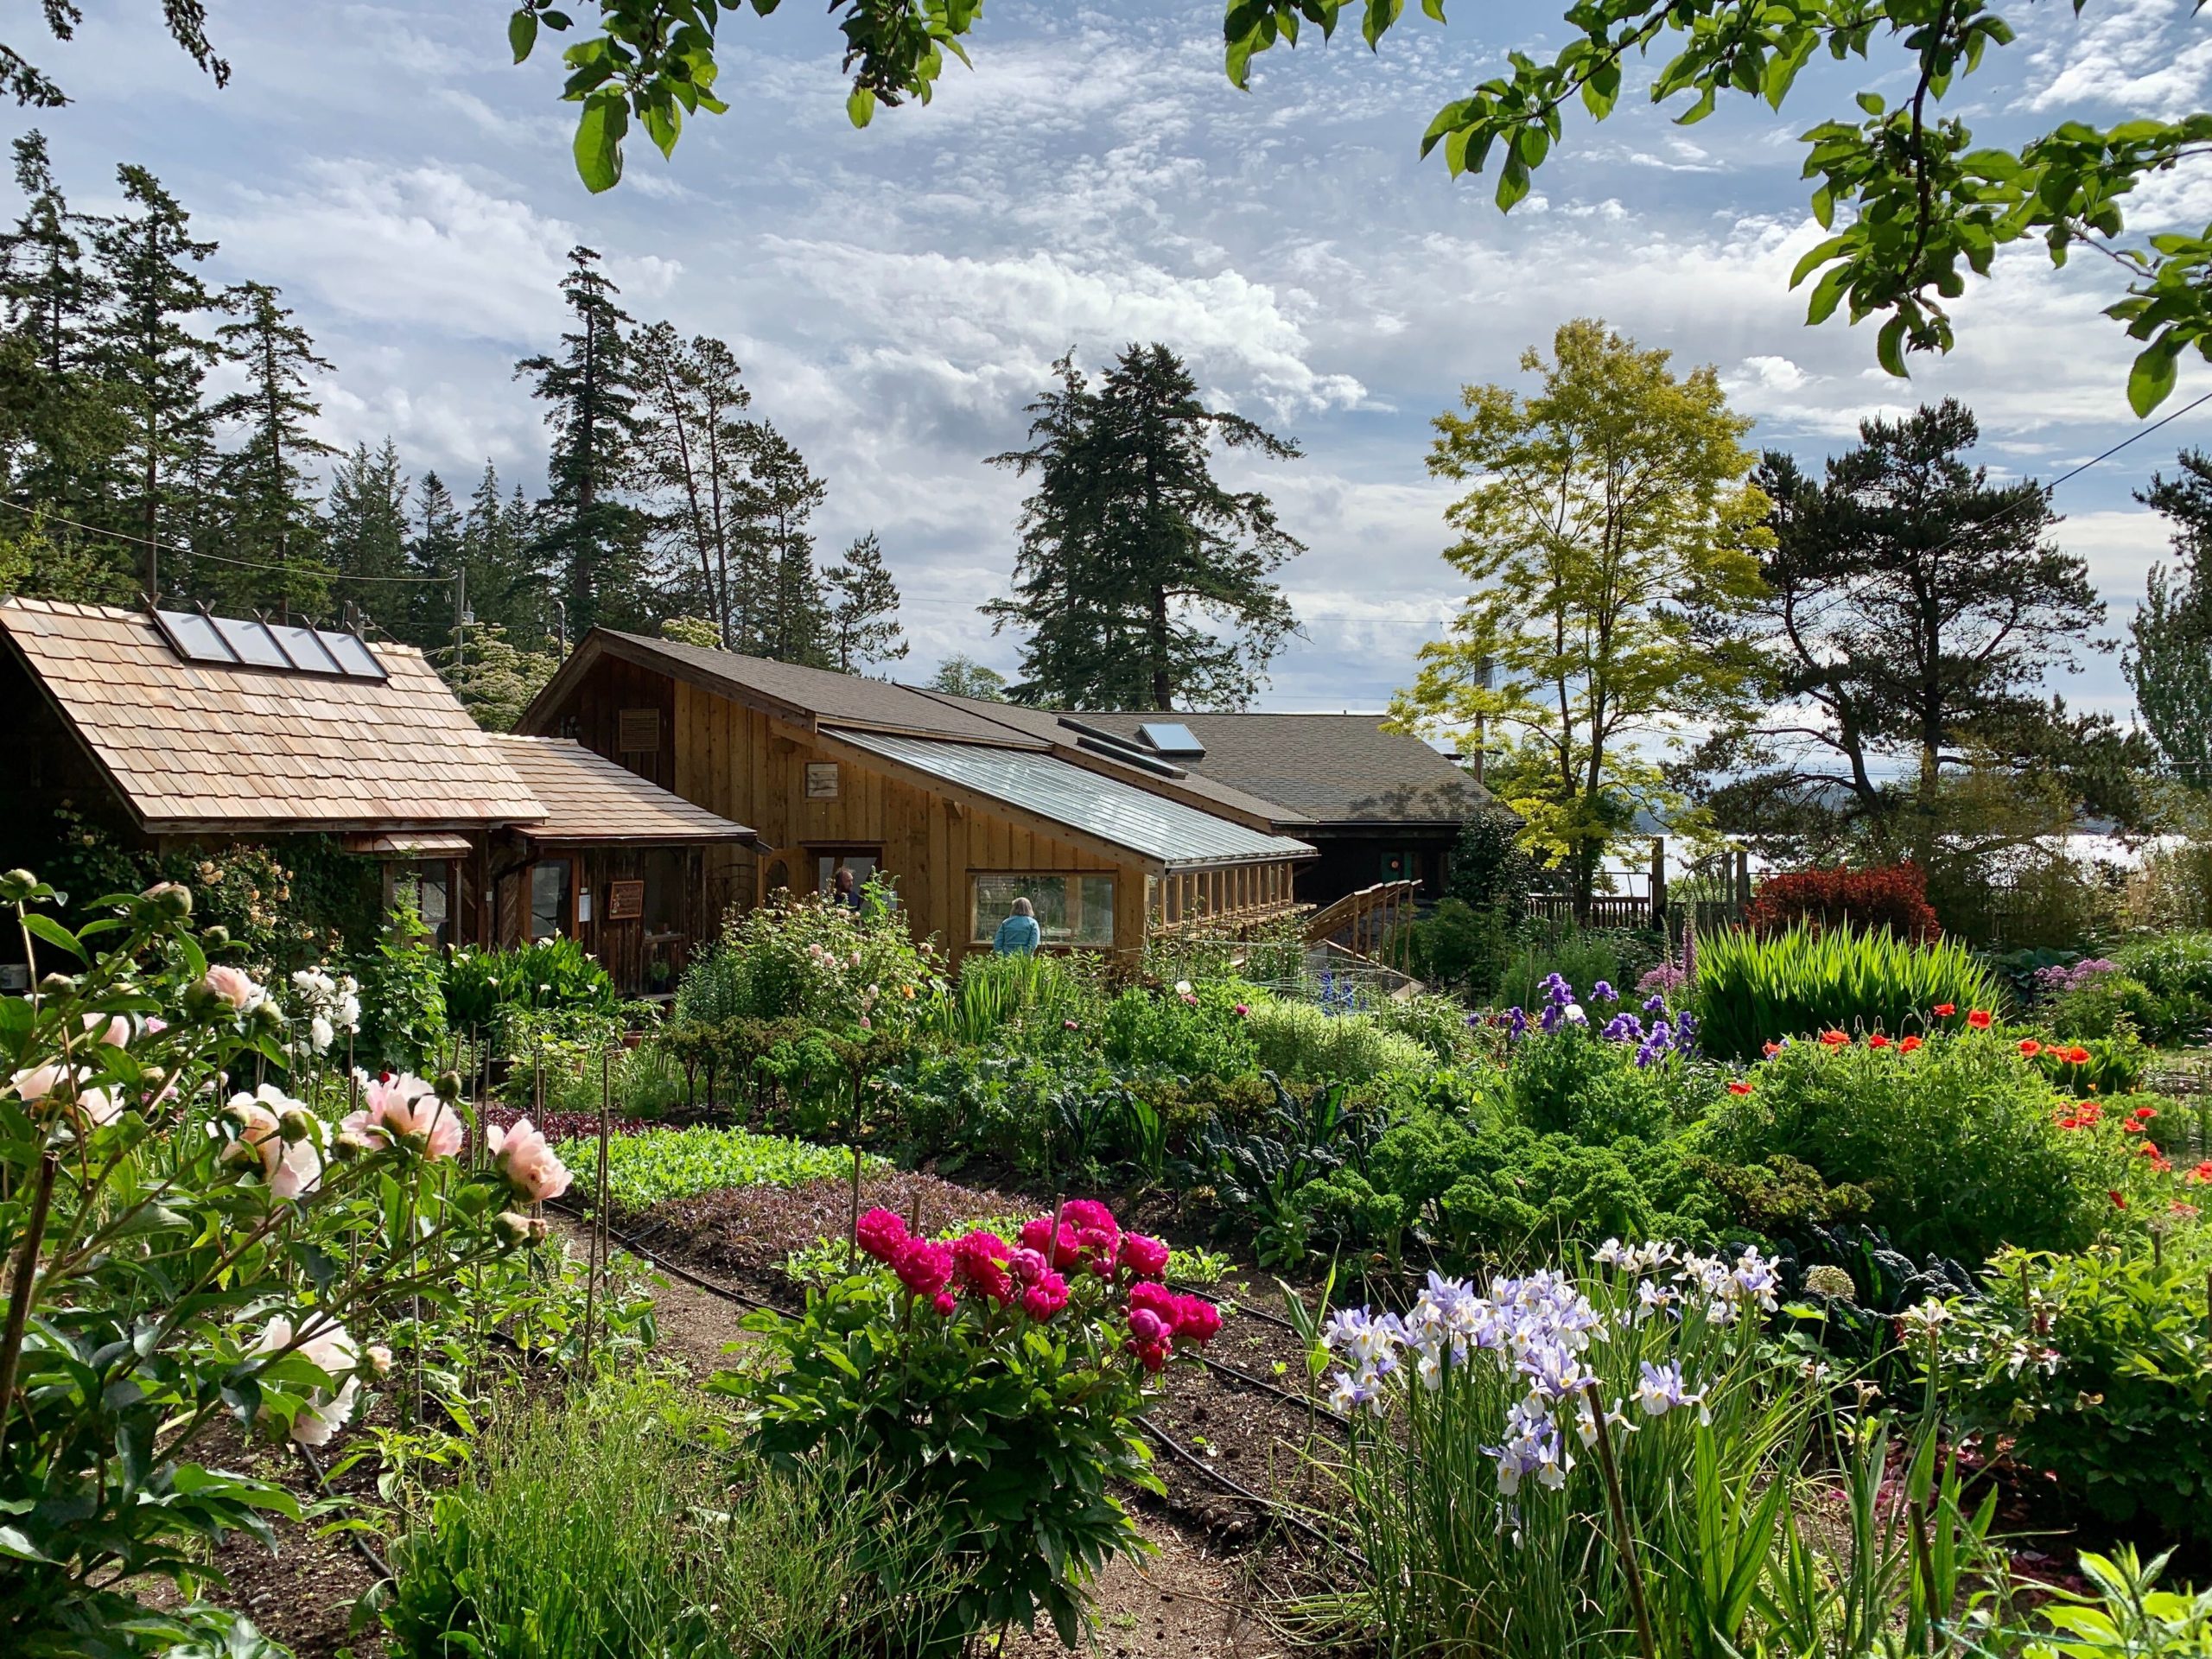 Beautiful gardens and houses at Hollyhock retreat centre in Cortes Island, BC